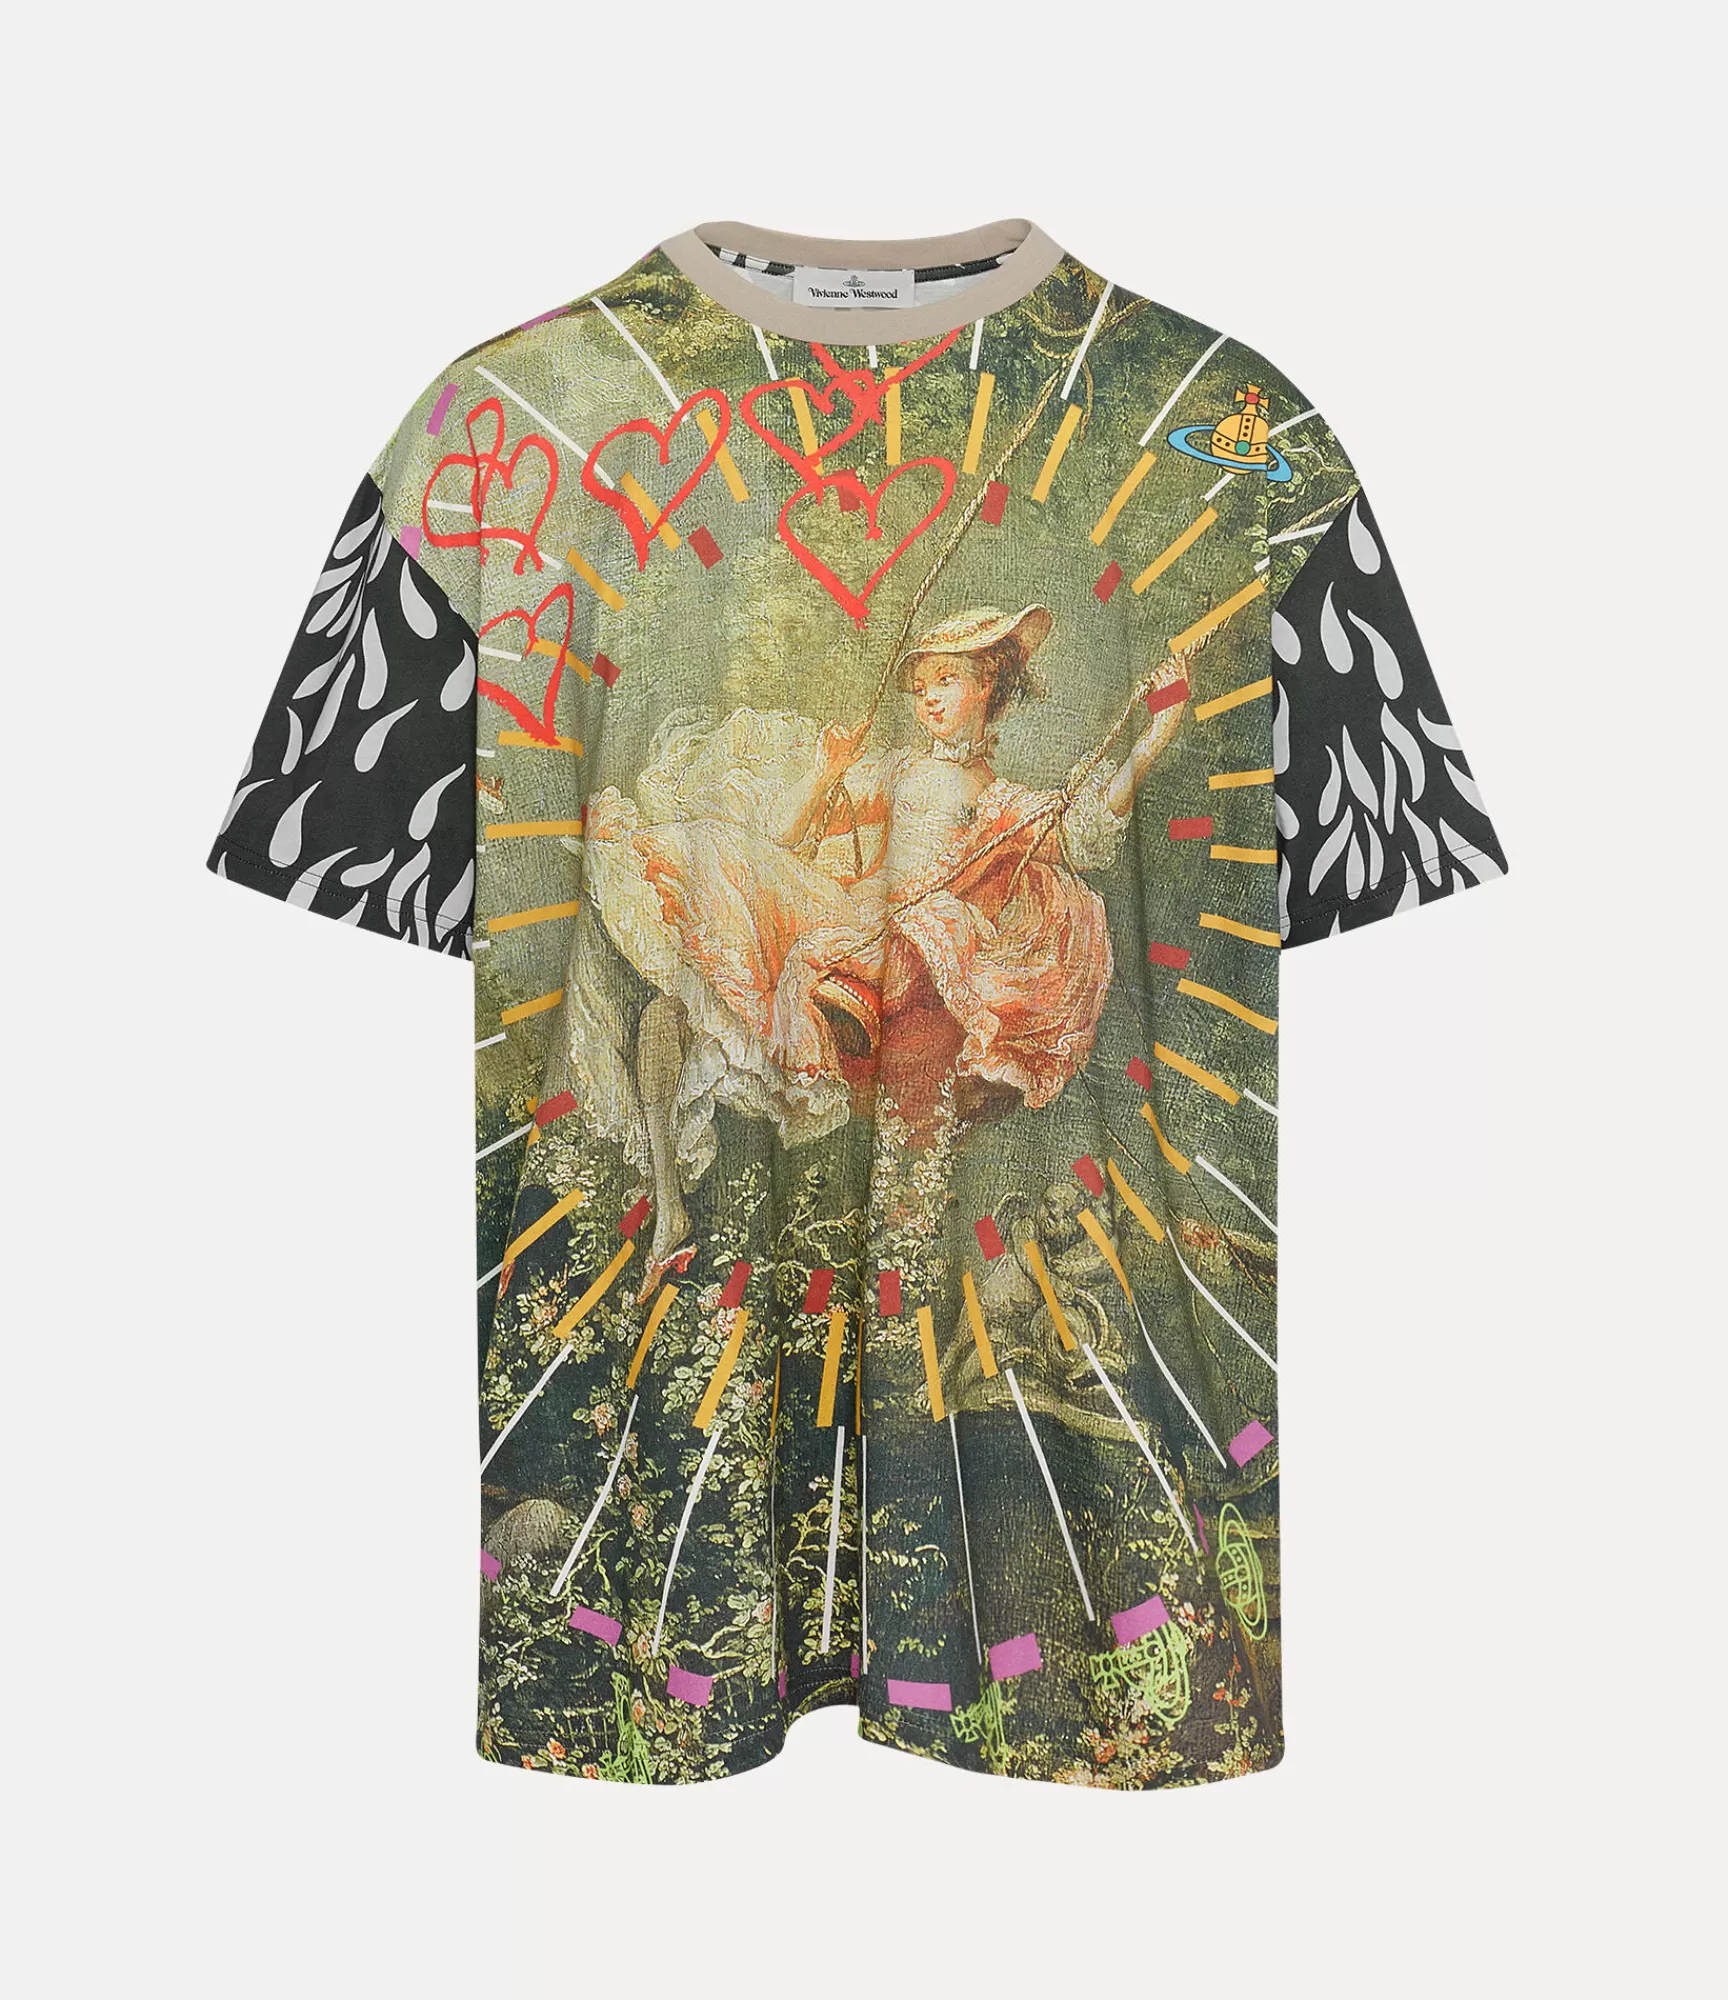 Vivienne Westwood T-Shirts and Polos | Sweatshirts and T-Shirts*Oversized t-shirt The Swing